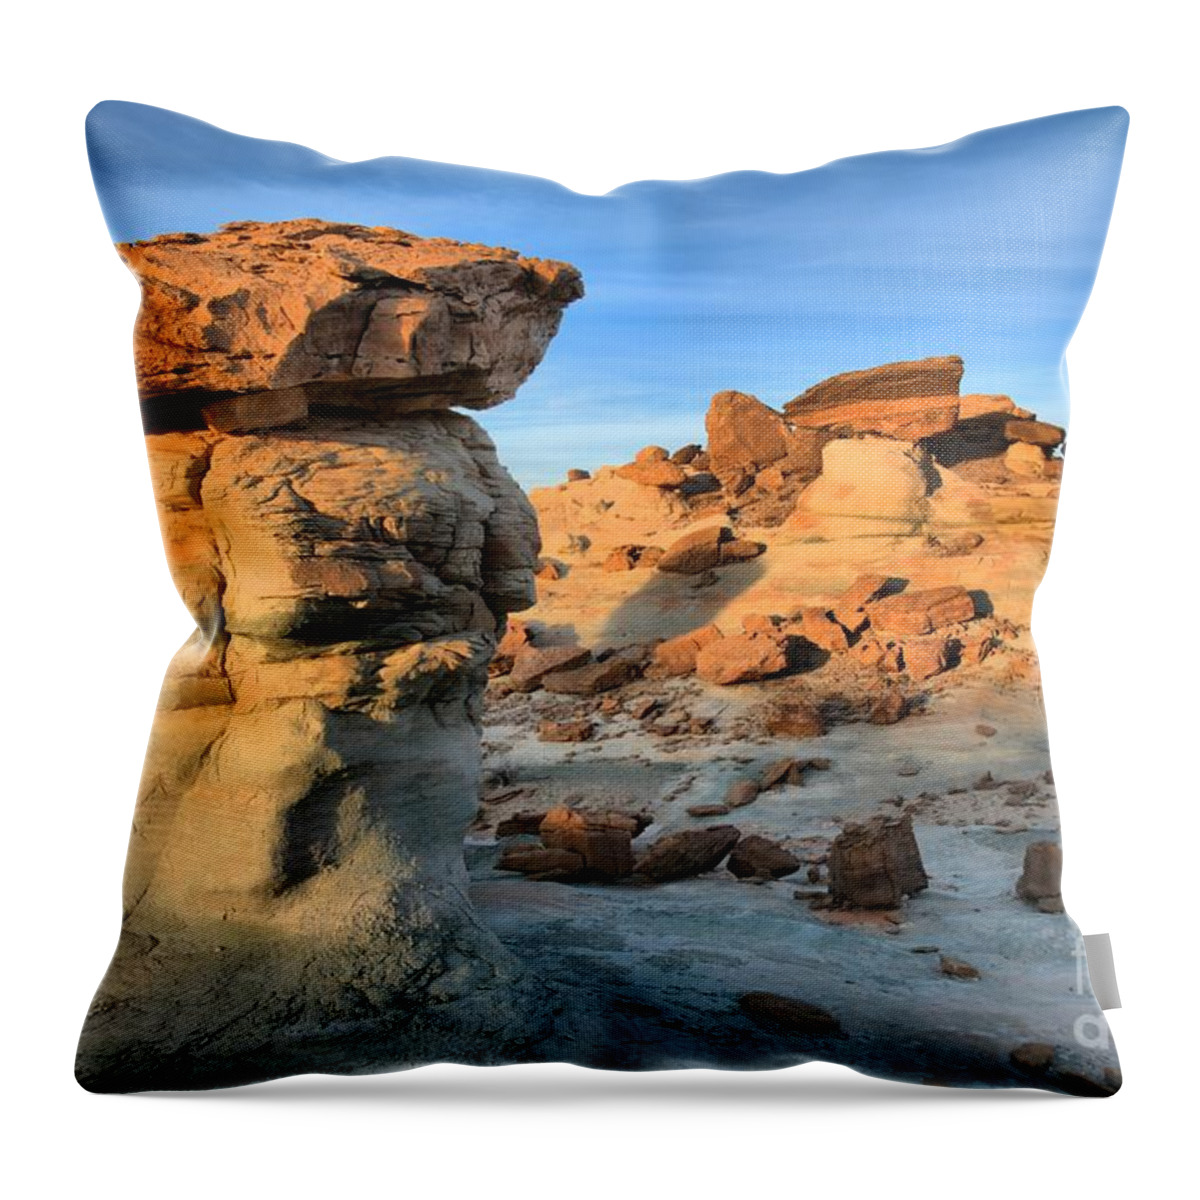 Stud Horse Point Throw Pillow featuring the photograph Last Light At Stud Horse by Adam Jewell